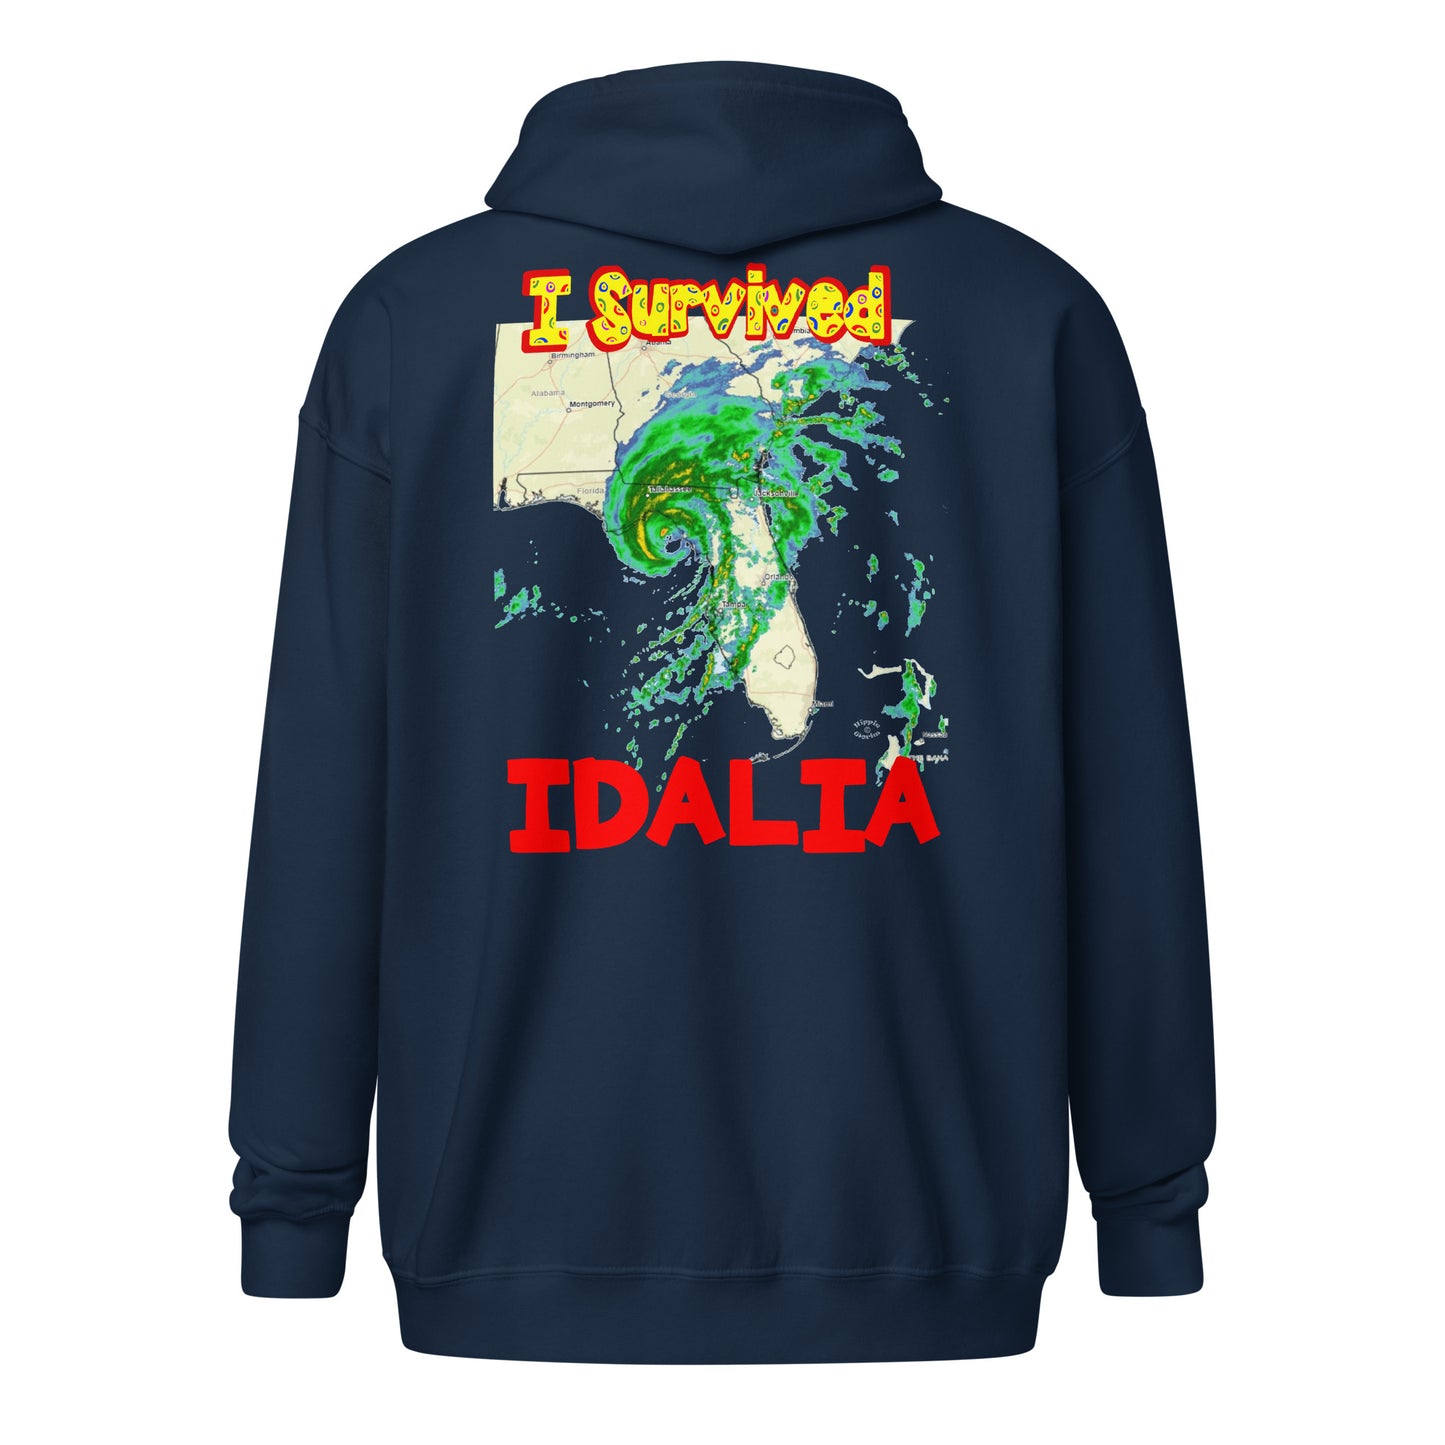 A cut out picture of a hoodie with back print design of I SURVIVED Hurricane IDALIA Unisex Heavy Blend Zip Hoodie in navy blue